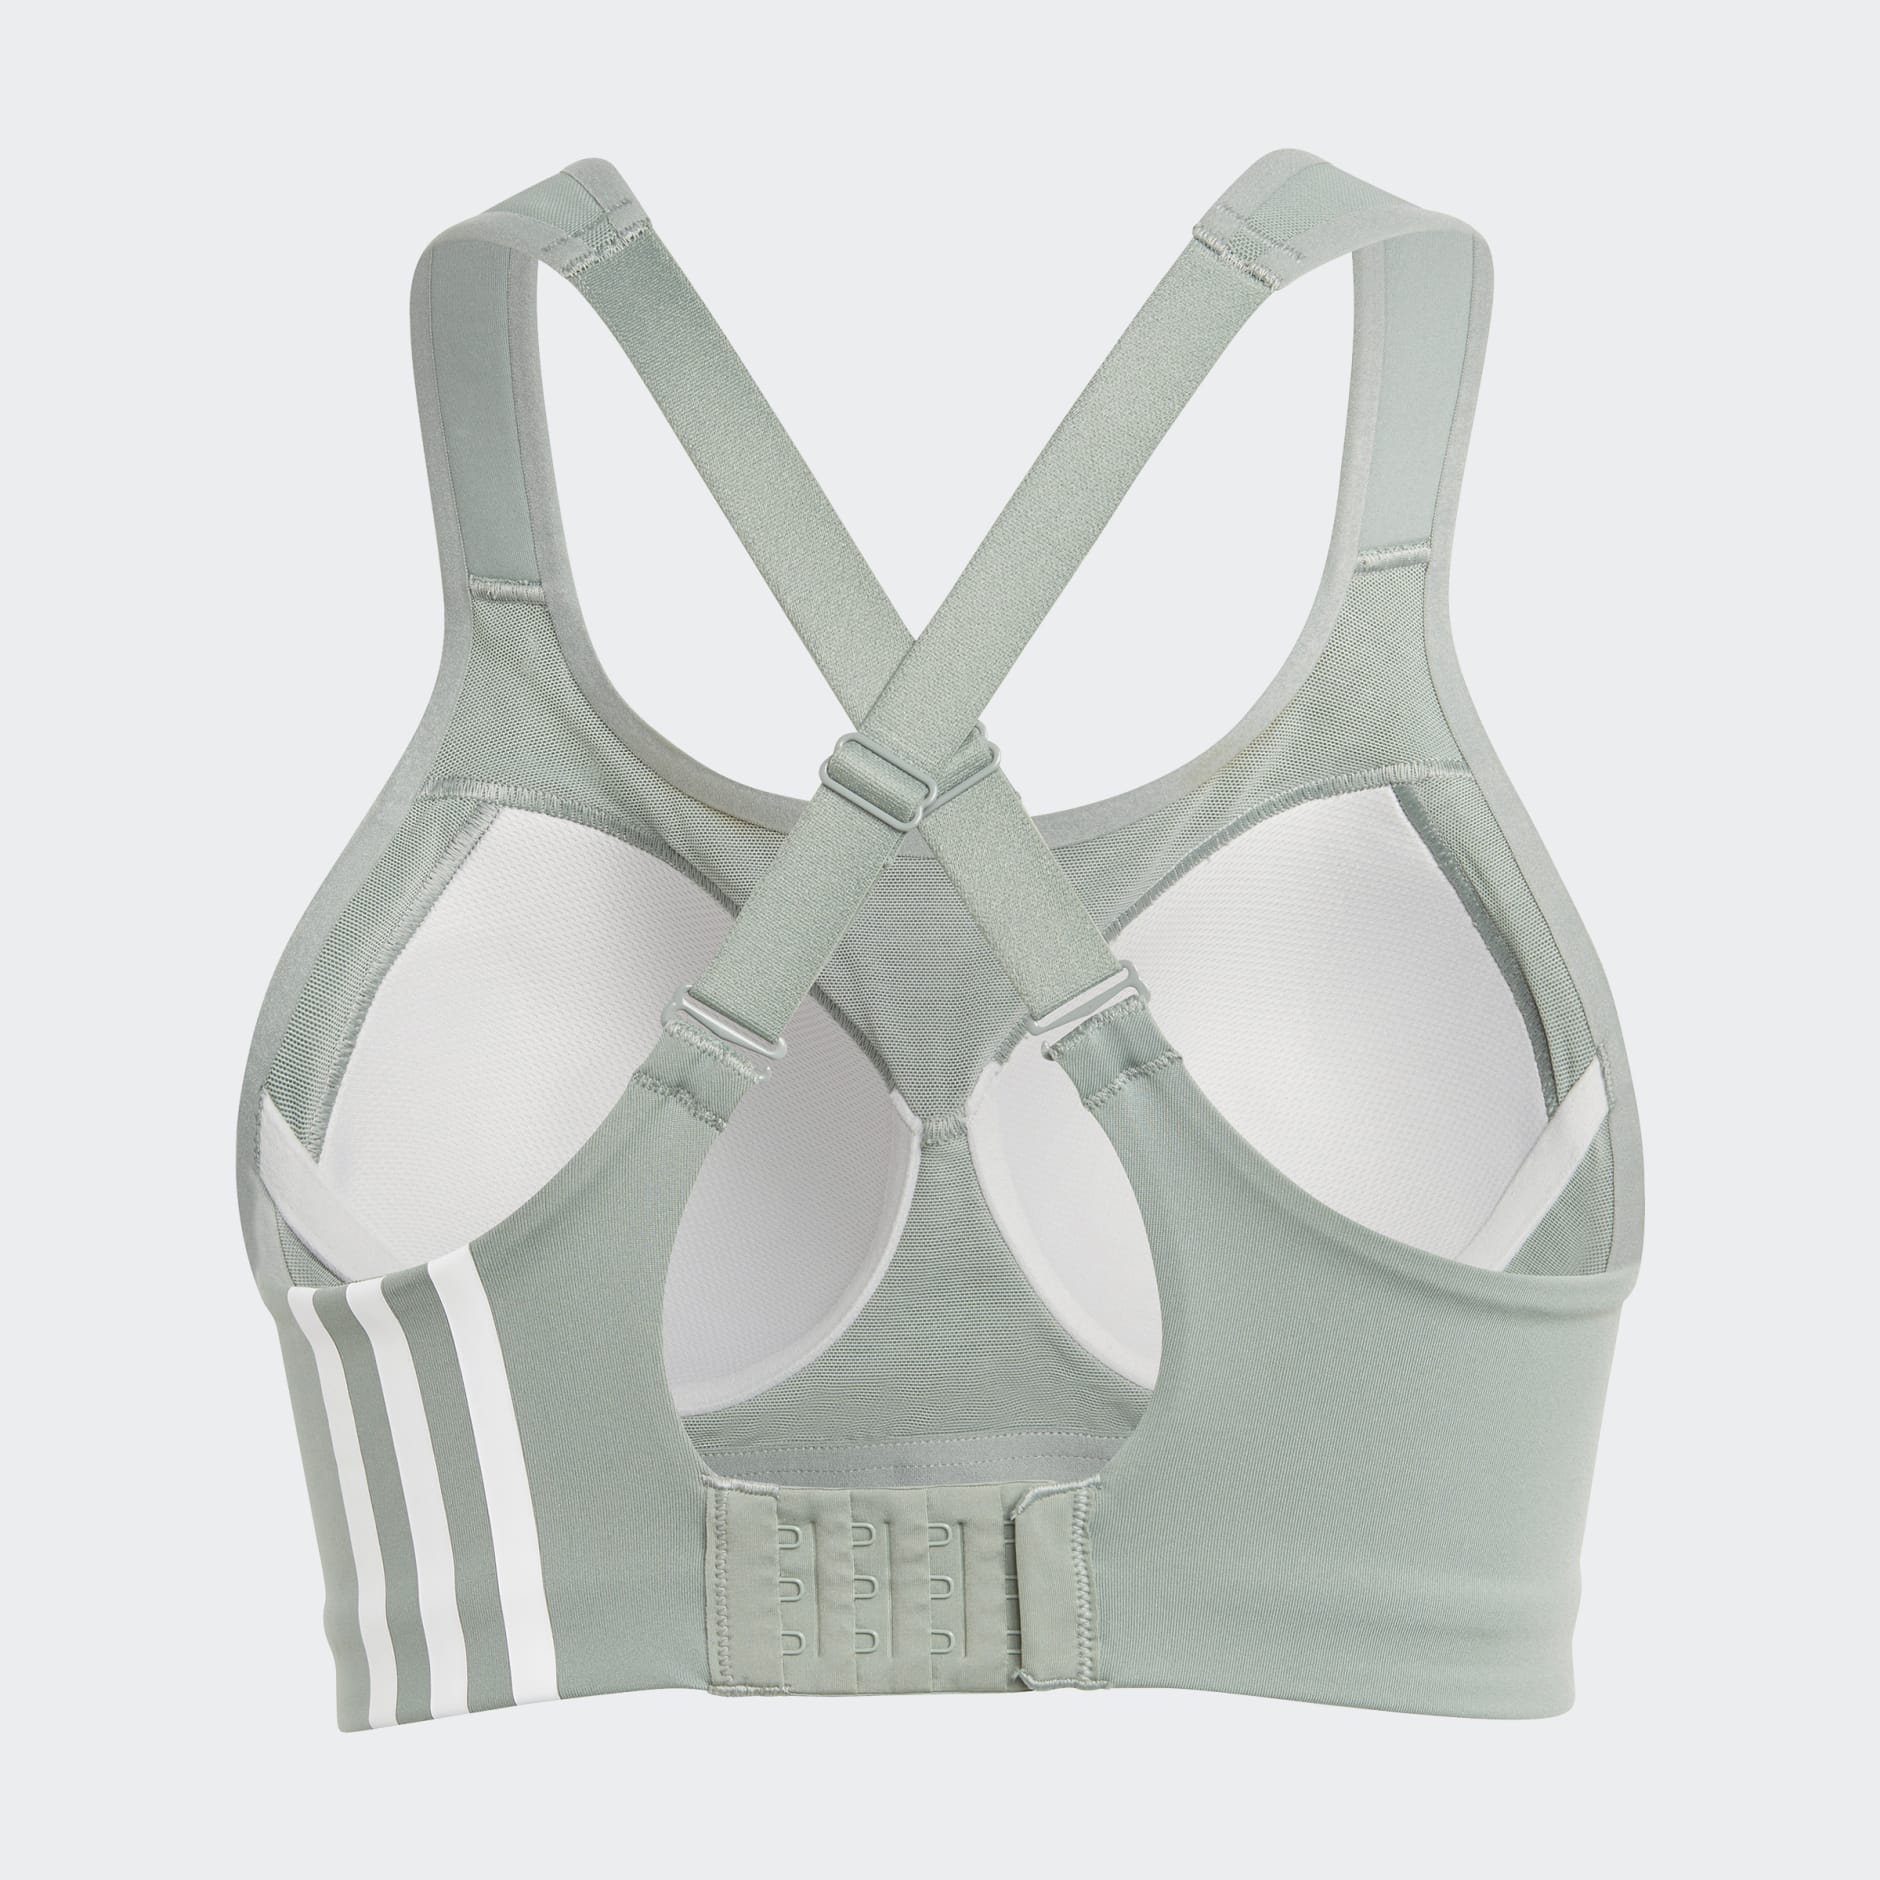 Women's Clothing - adidas TLRD Impact Training High-Support Bra - Green